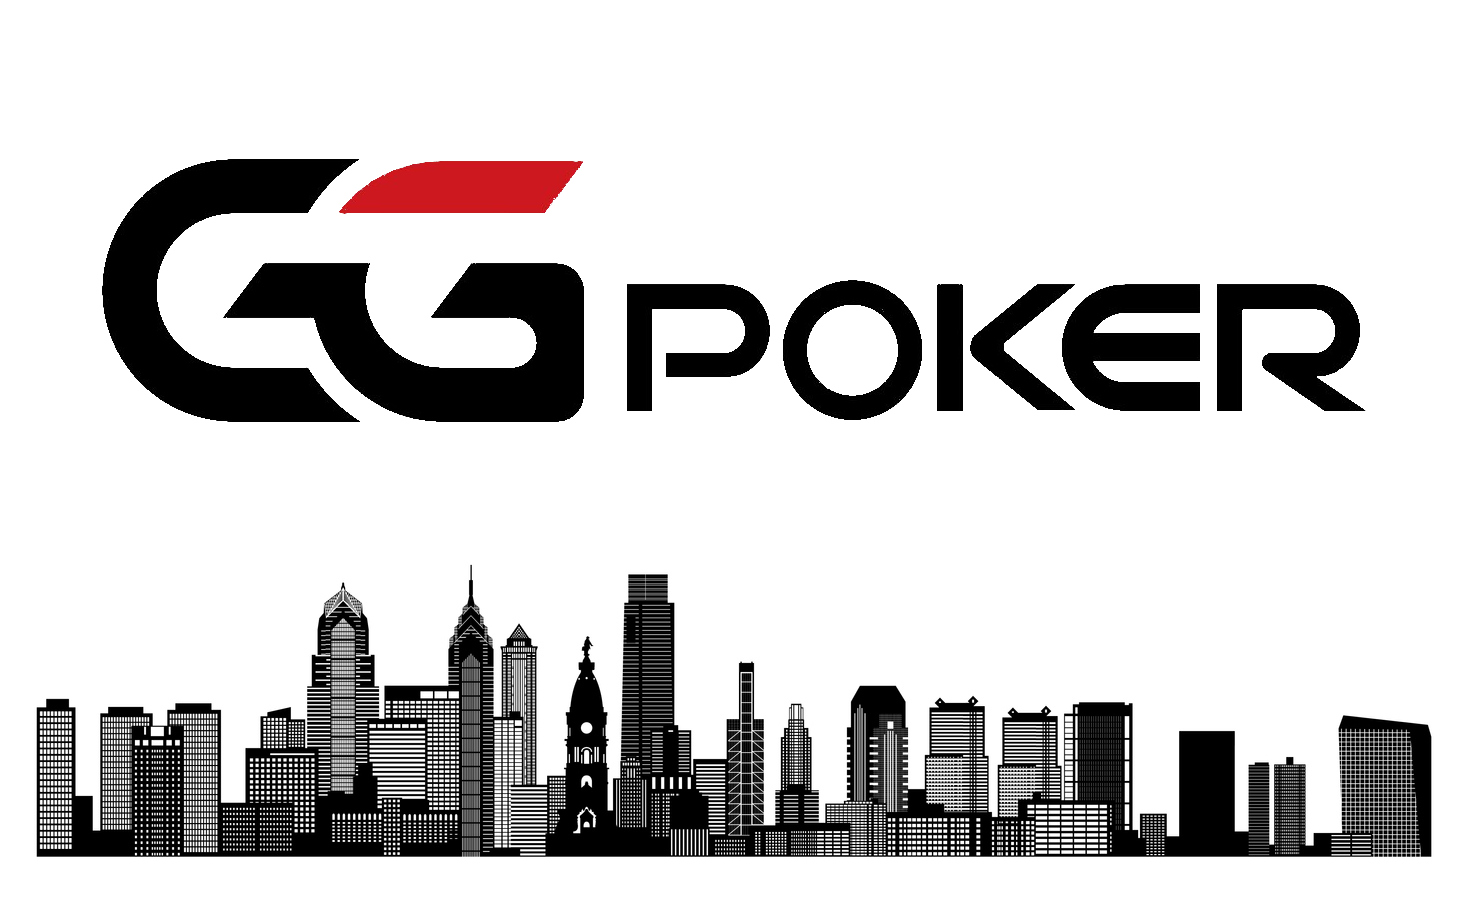 GGPoker Logo is seen over a graphic depiction of the Philadelphia Skyline